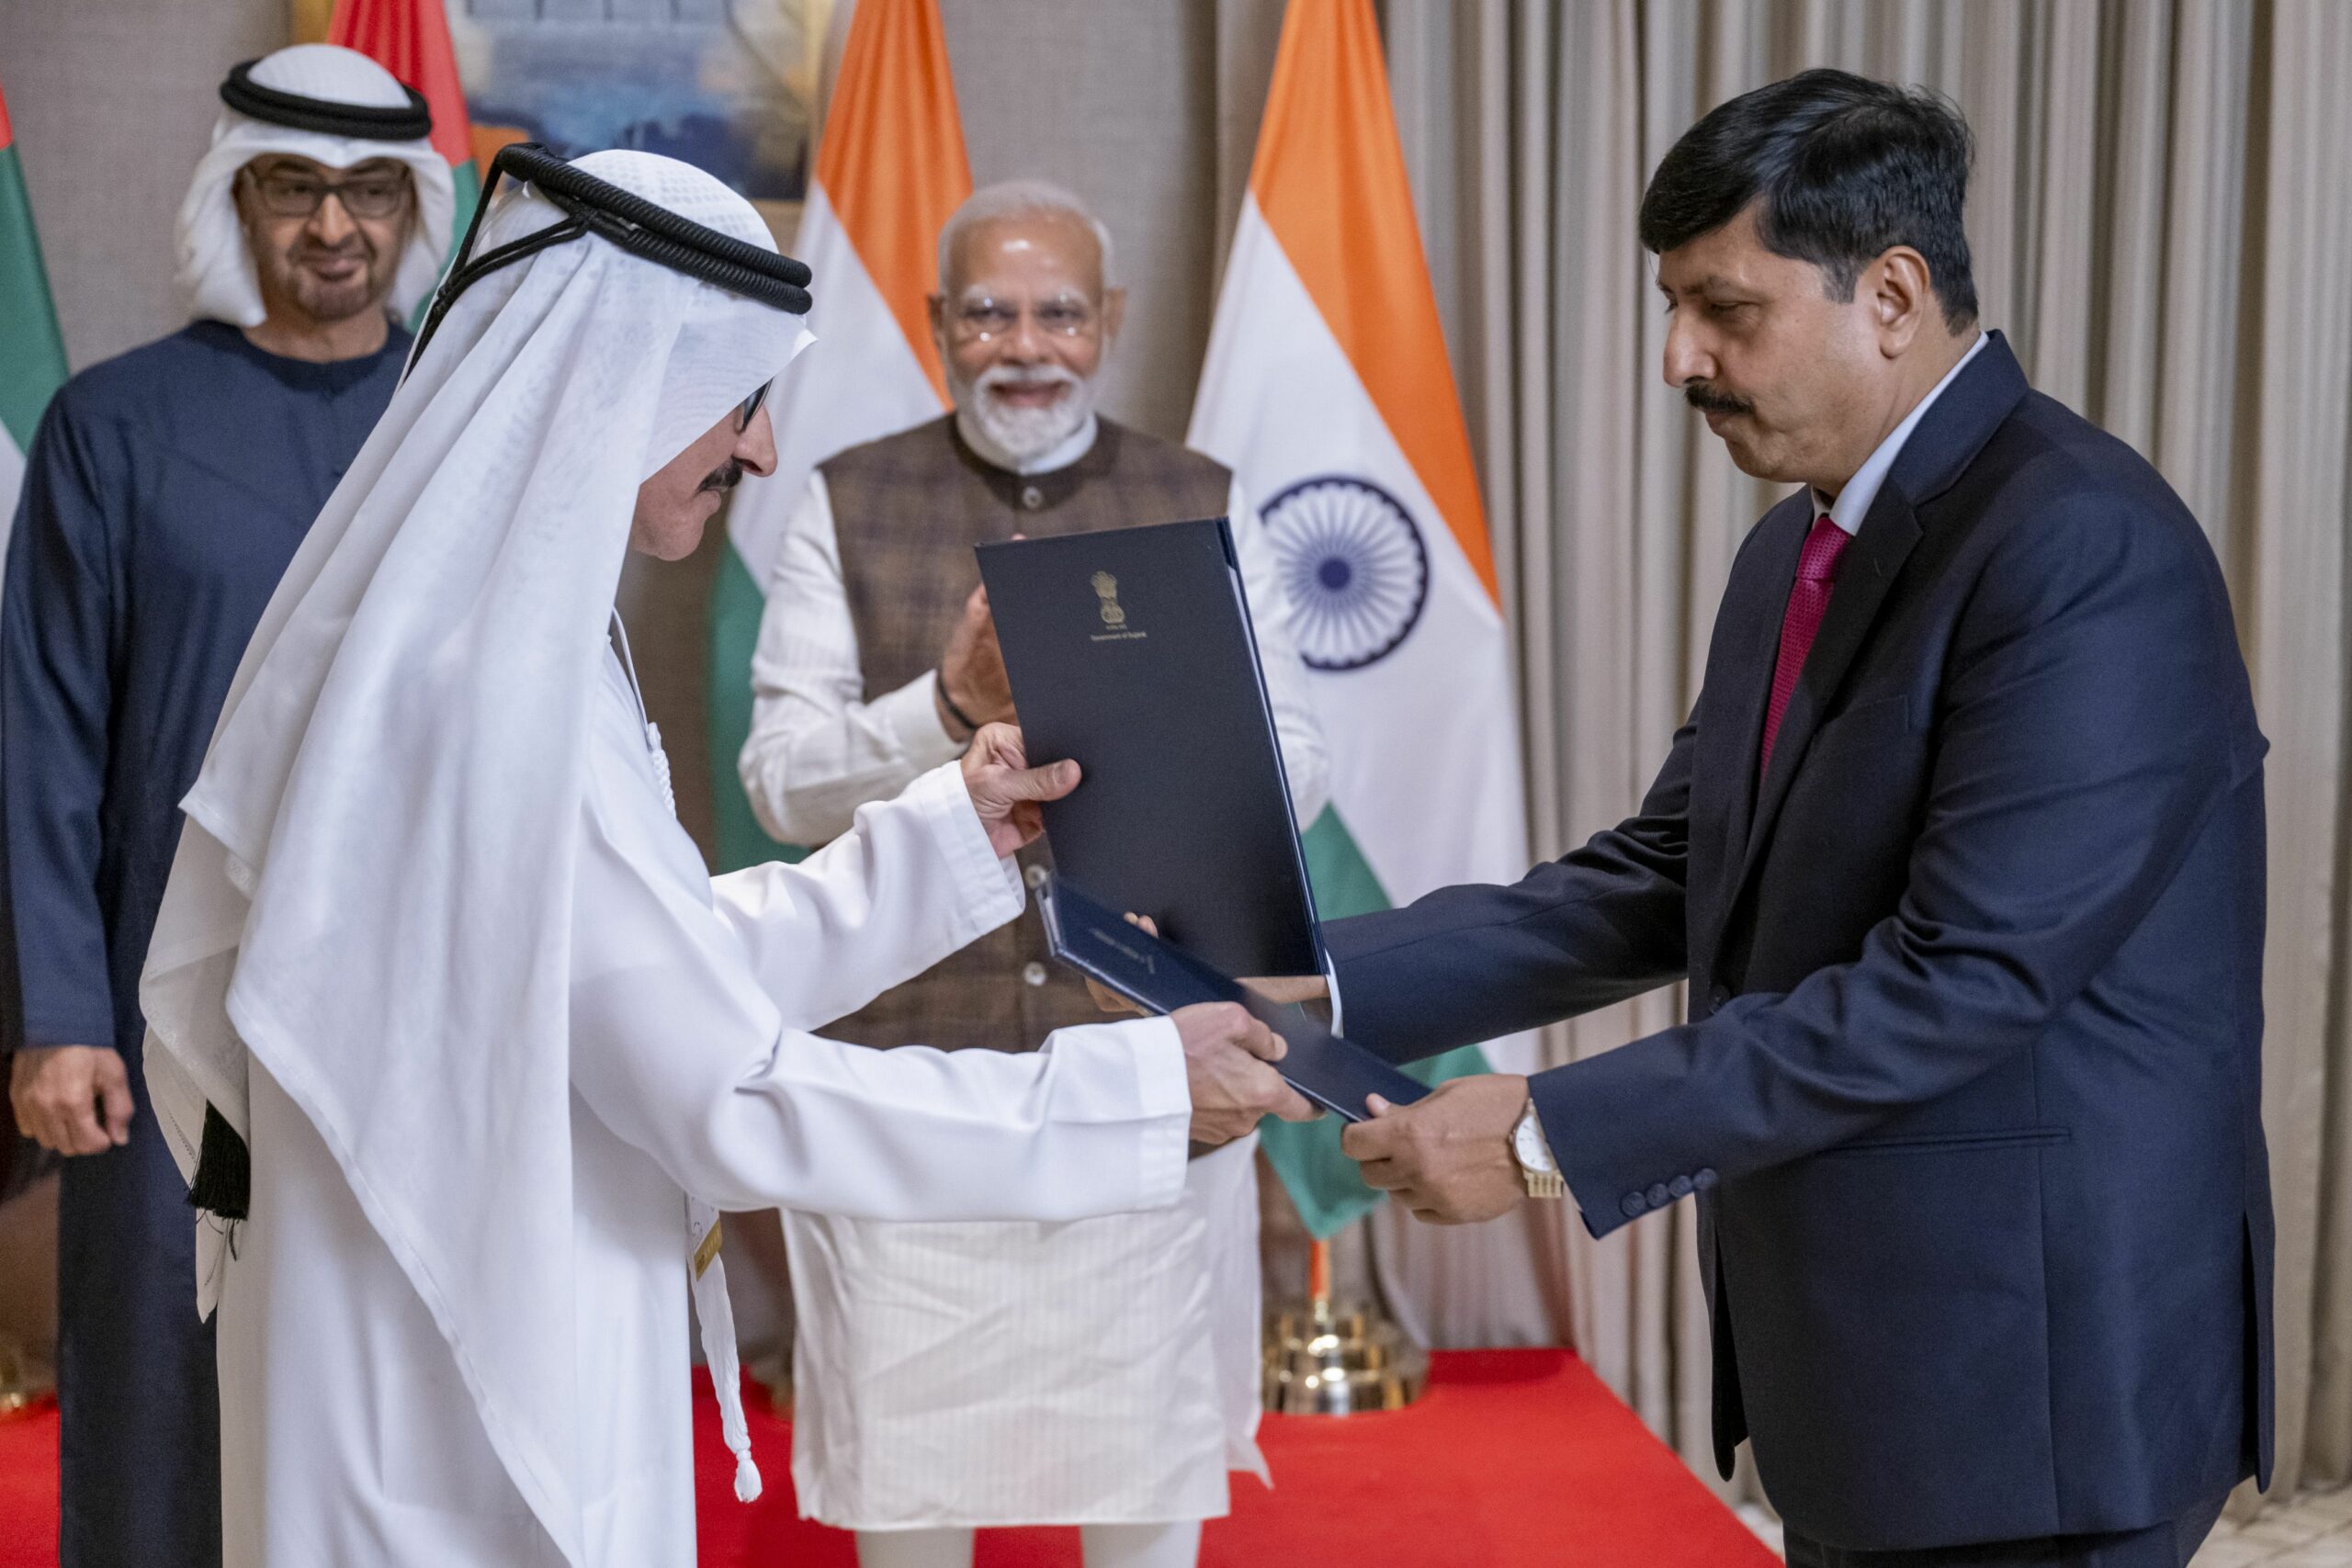 GUJARAT AND DP WORLD SIGN AGREEMENTS TO STRENGTHEN LOGISTICS IN THE INDIAN STATE